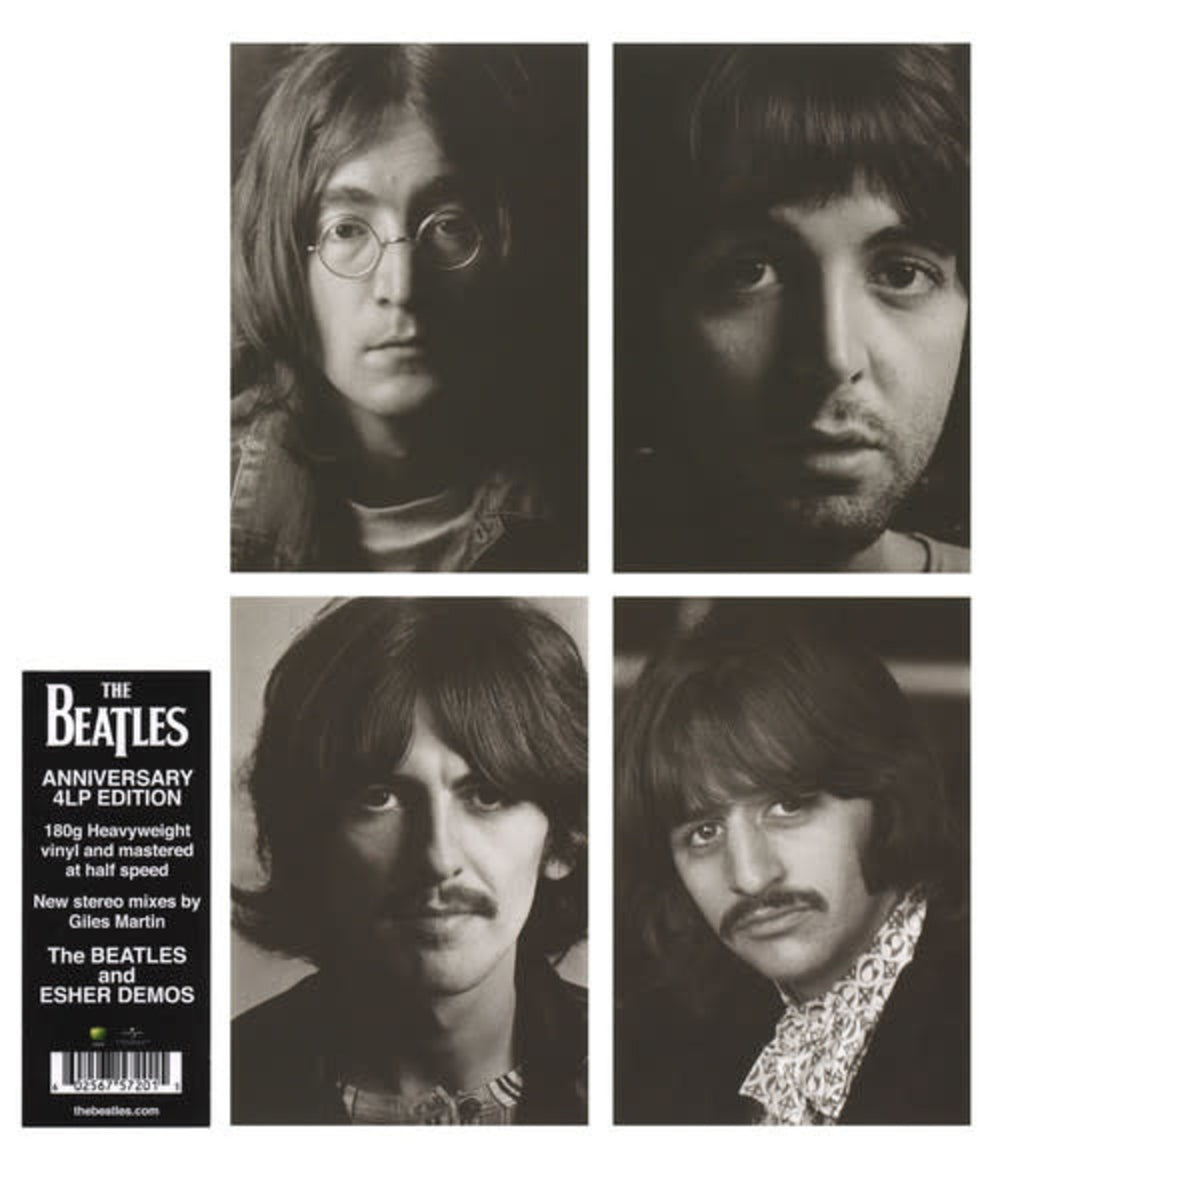 The Beatles - The Beatles: 50th Anniversary Edition (The White Album) (LP)